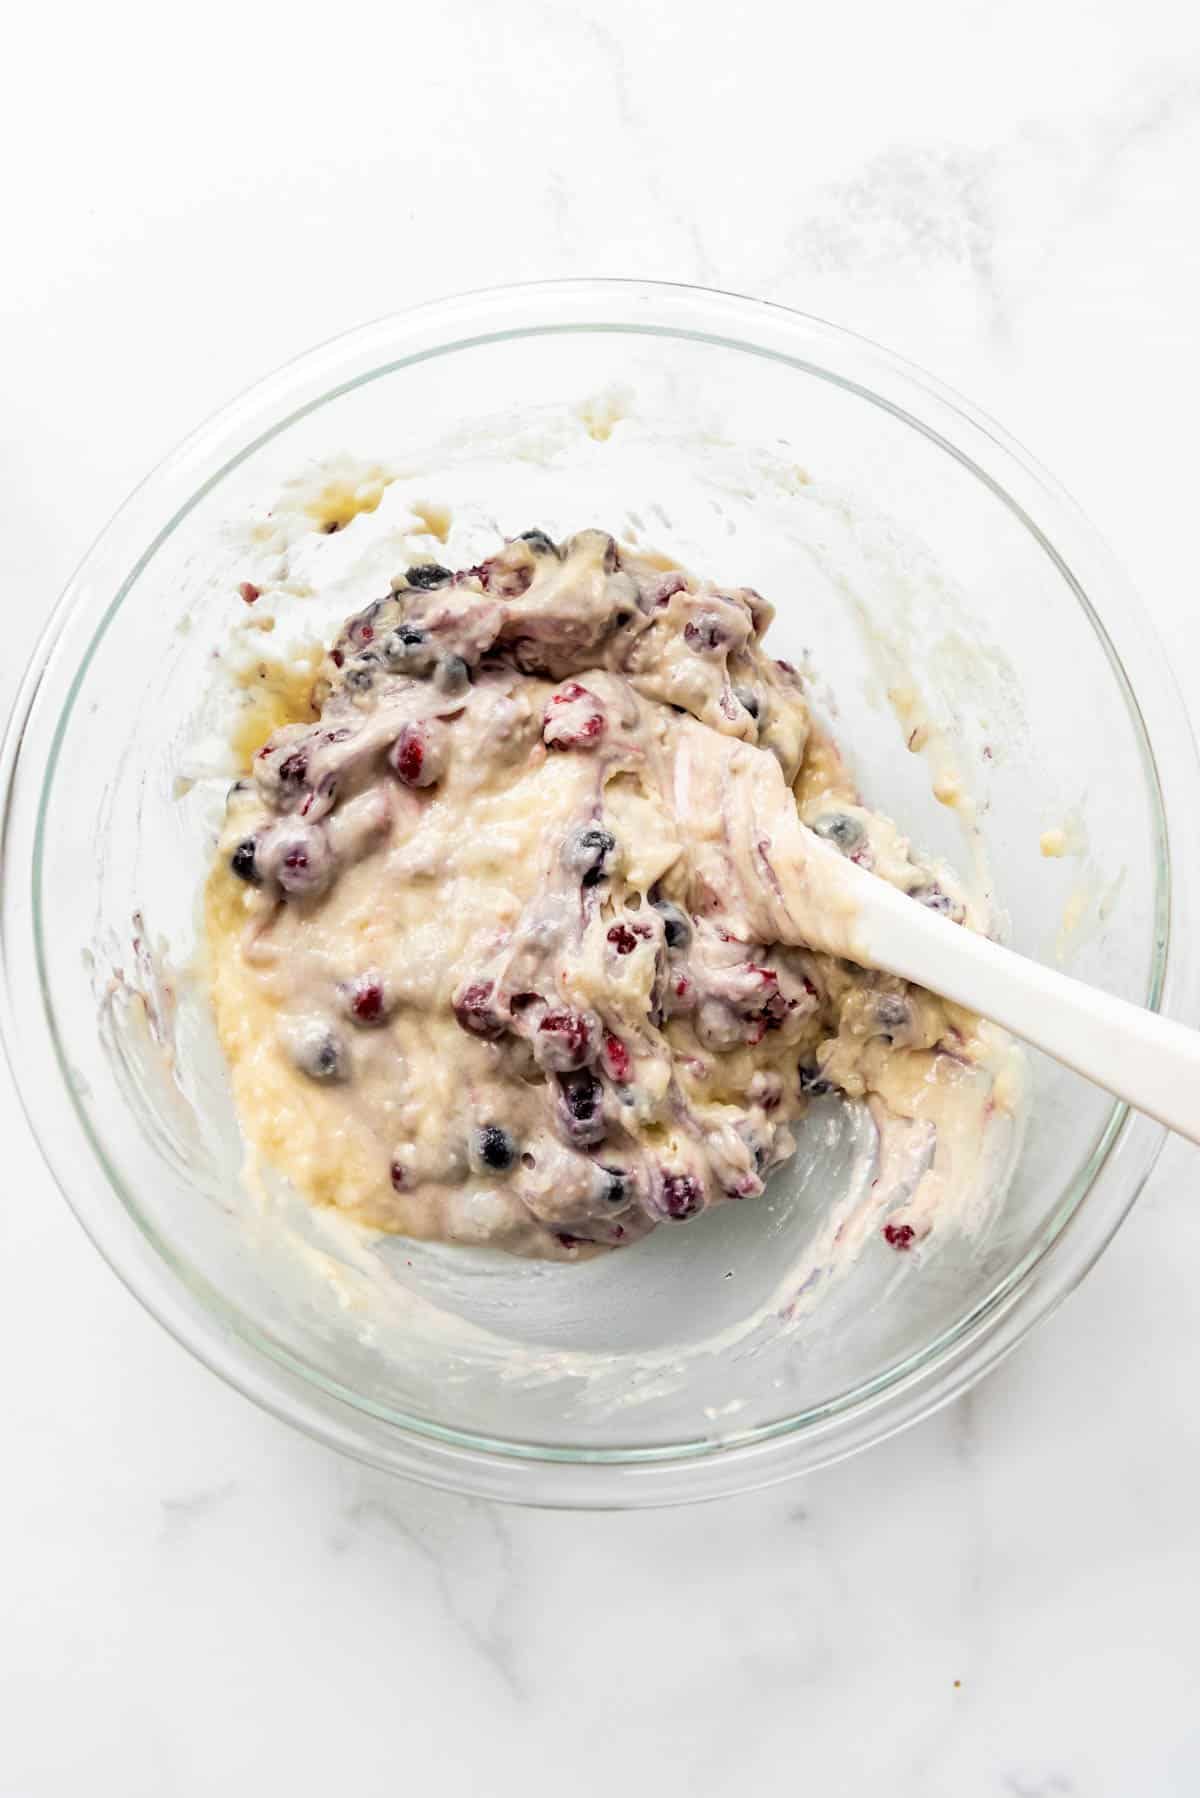 Gently stirring frozen mixed berries into muffin batter.